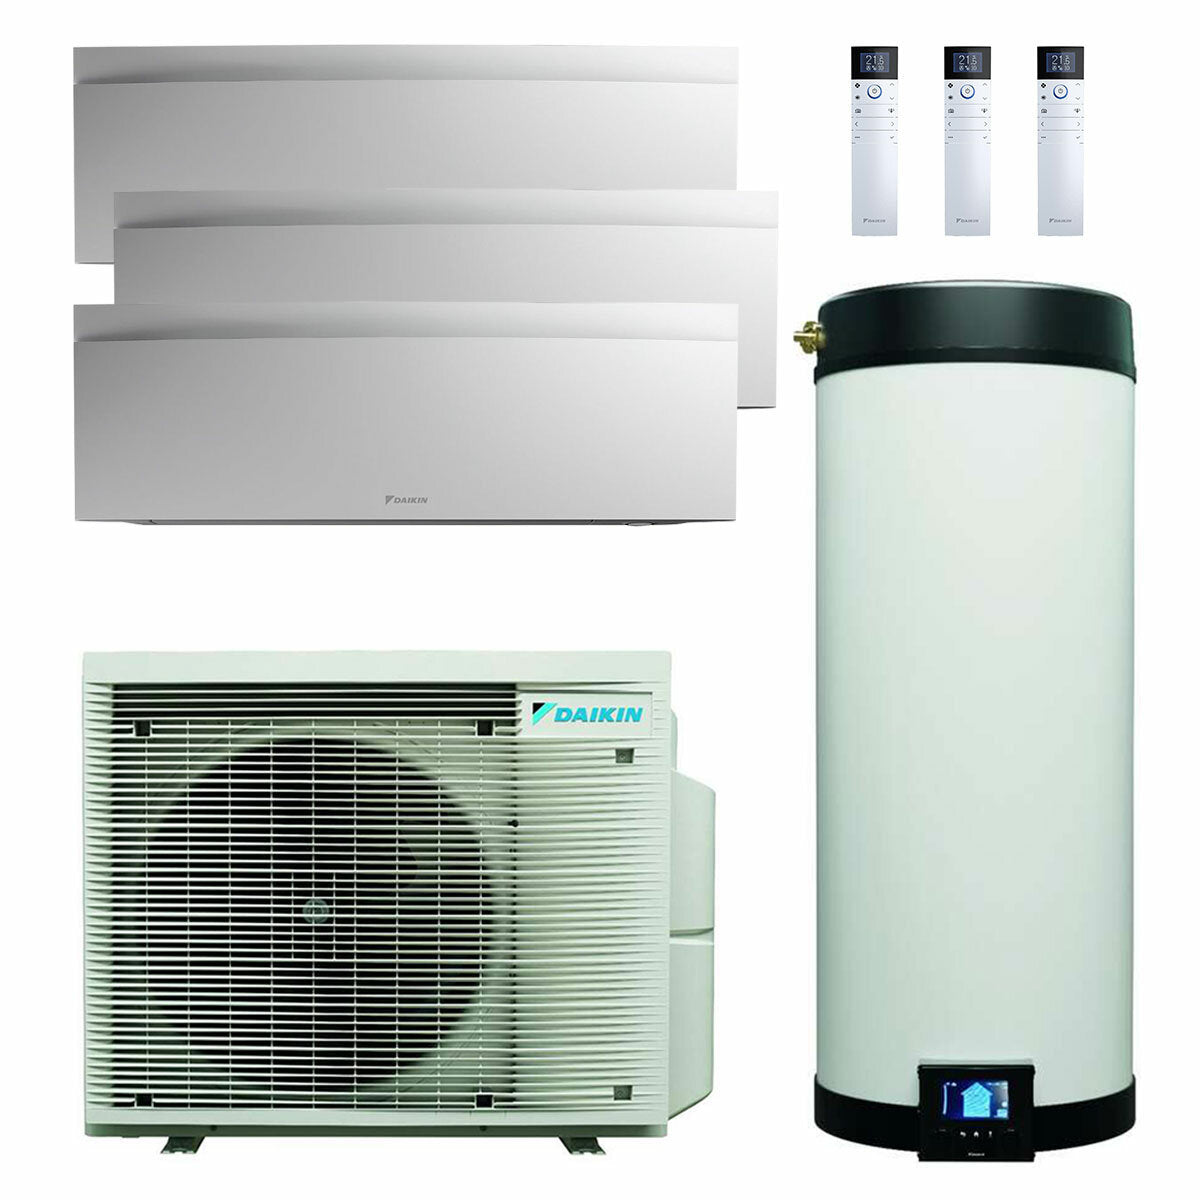 Daikin Multi+ trial split air conditioning system and domestic hot water - Indoor units Emura 3 white 9000+9000+12000 BTU - Tank 120 l